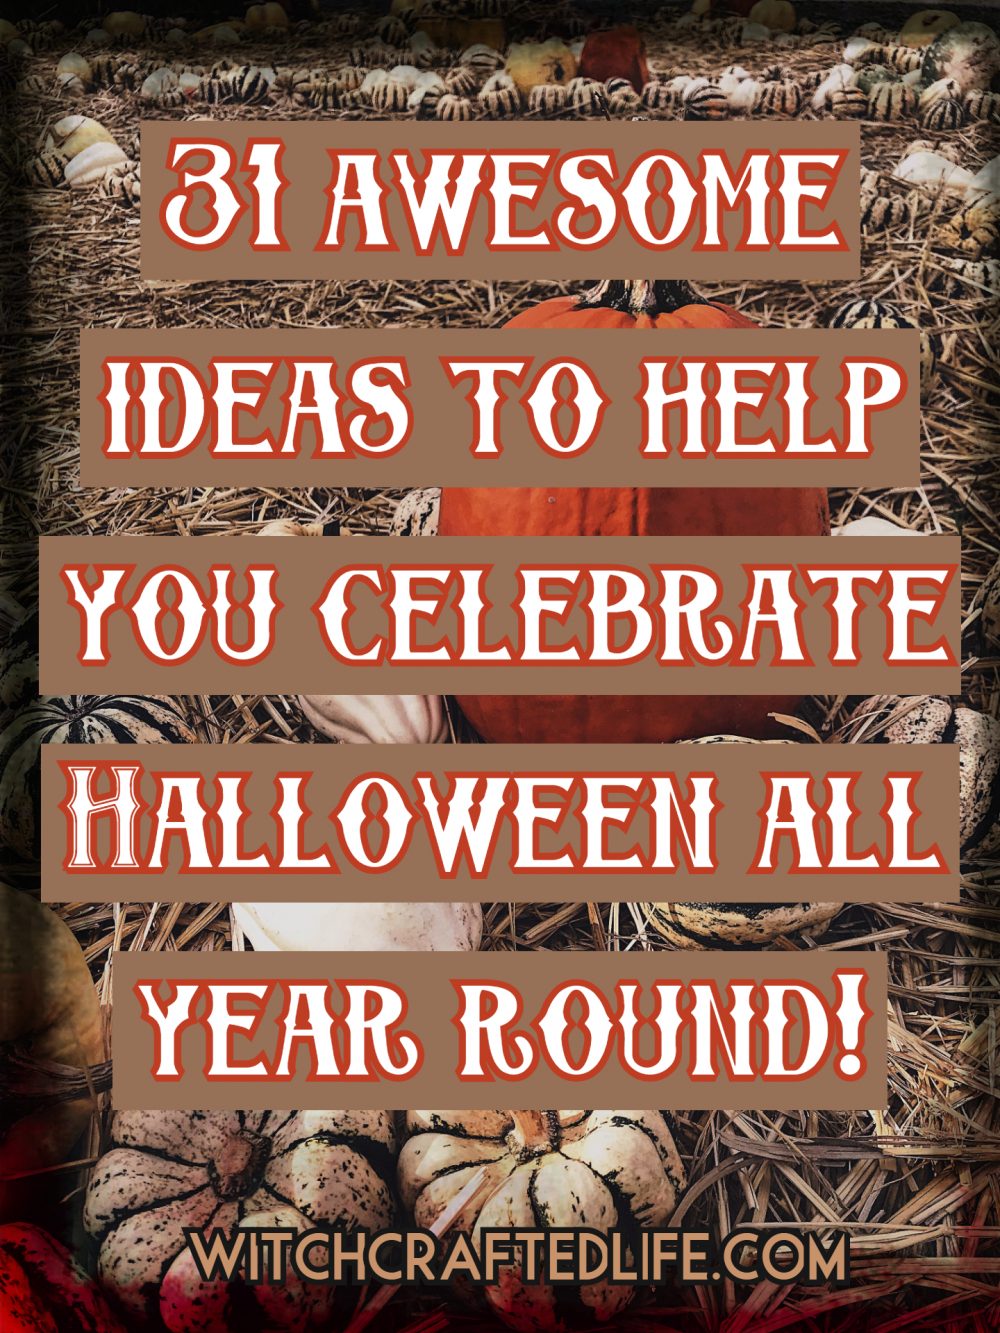 31 Awesome Ideas to Help You Celebrate Halloween All Year Round